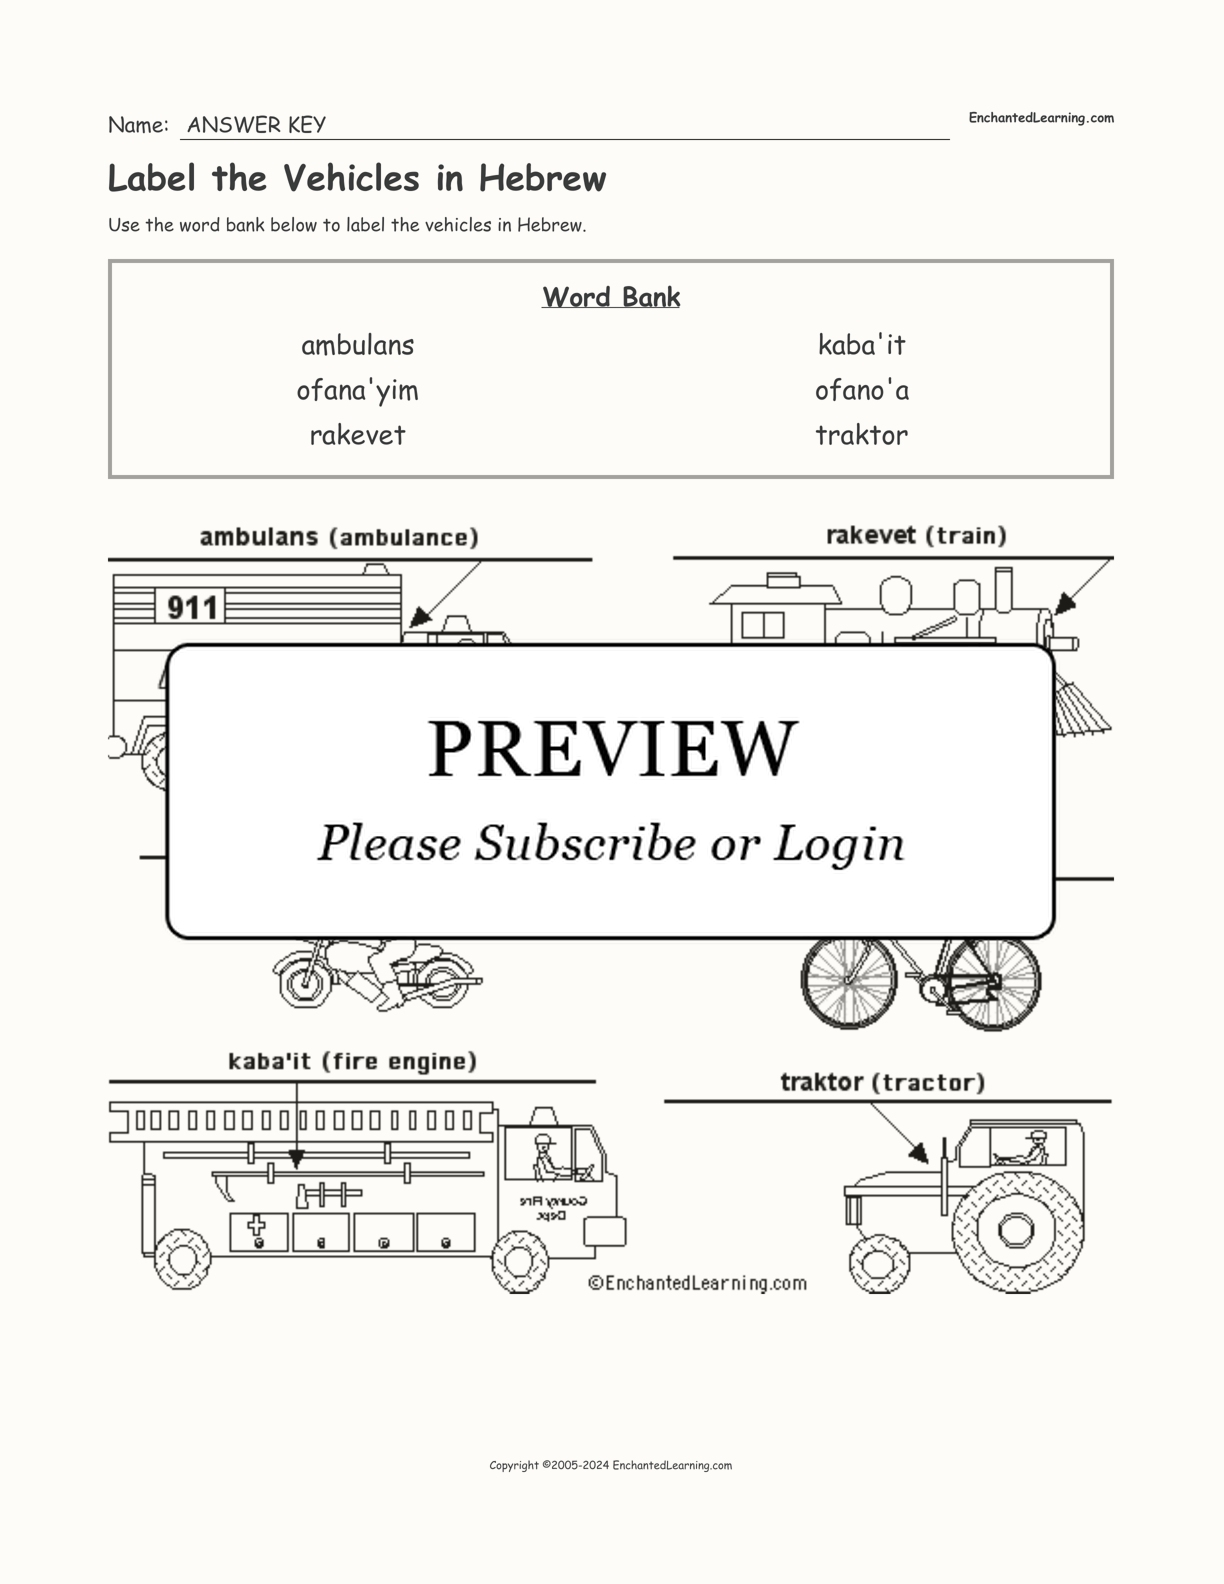 Label the Vehicles in Hebrew interactive worksheet page 2